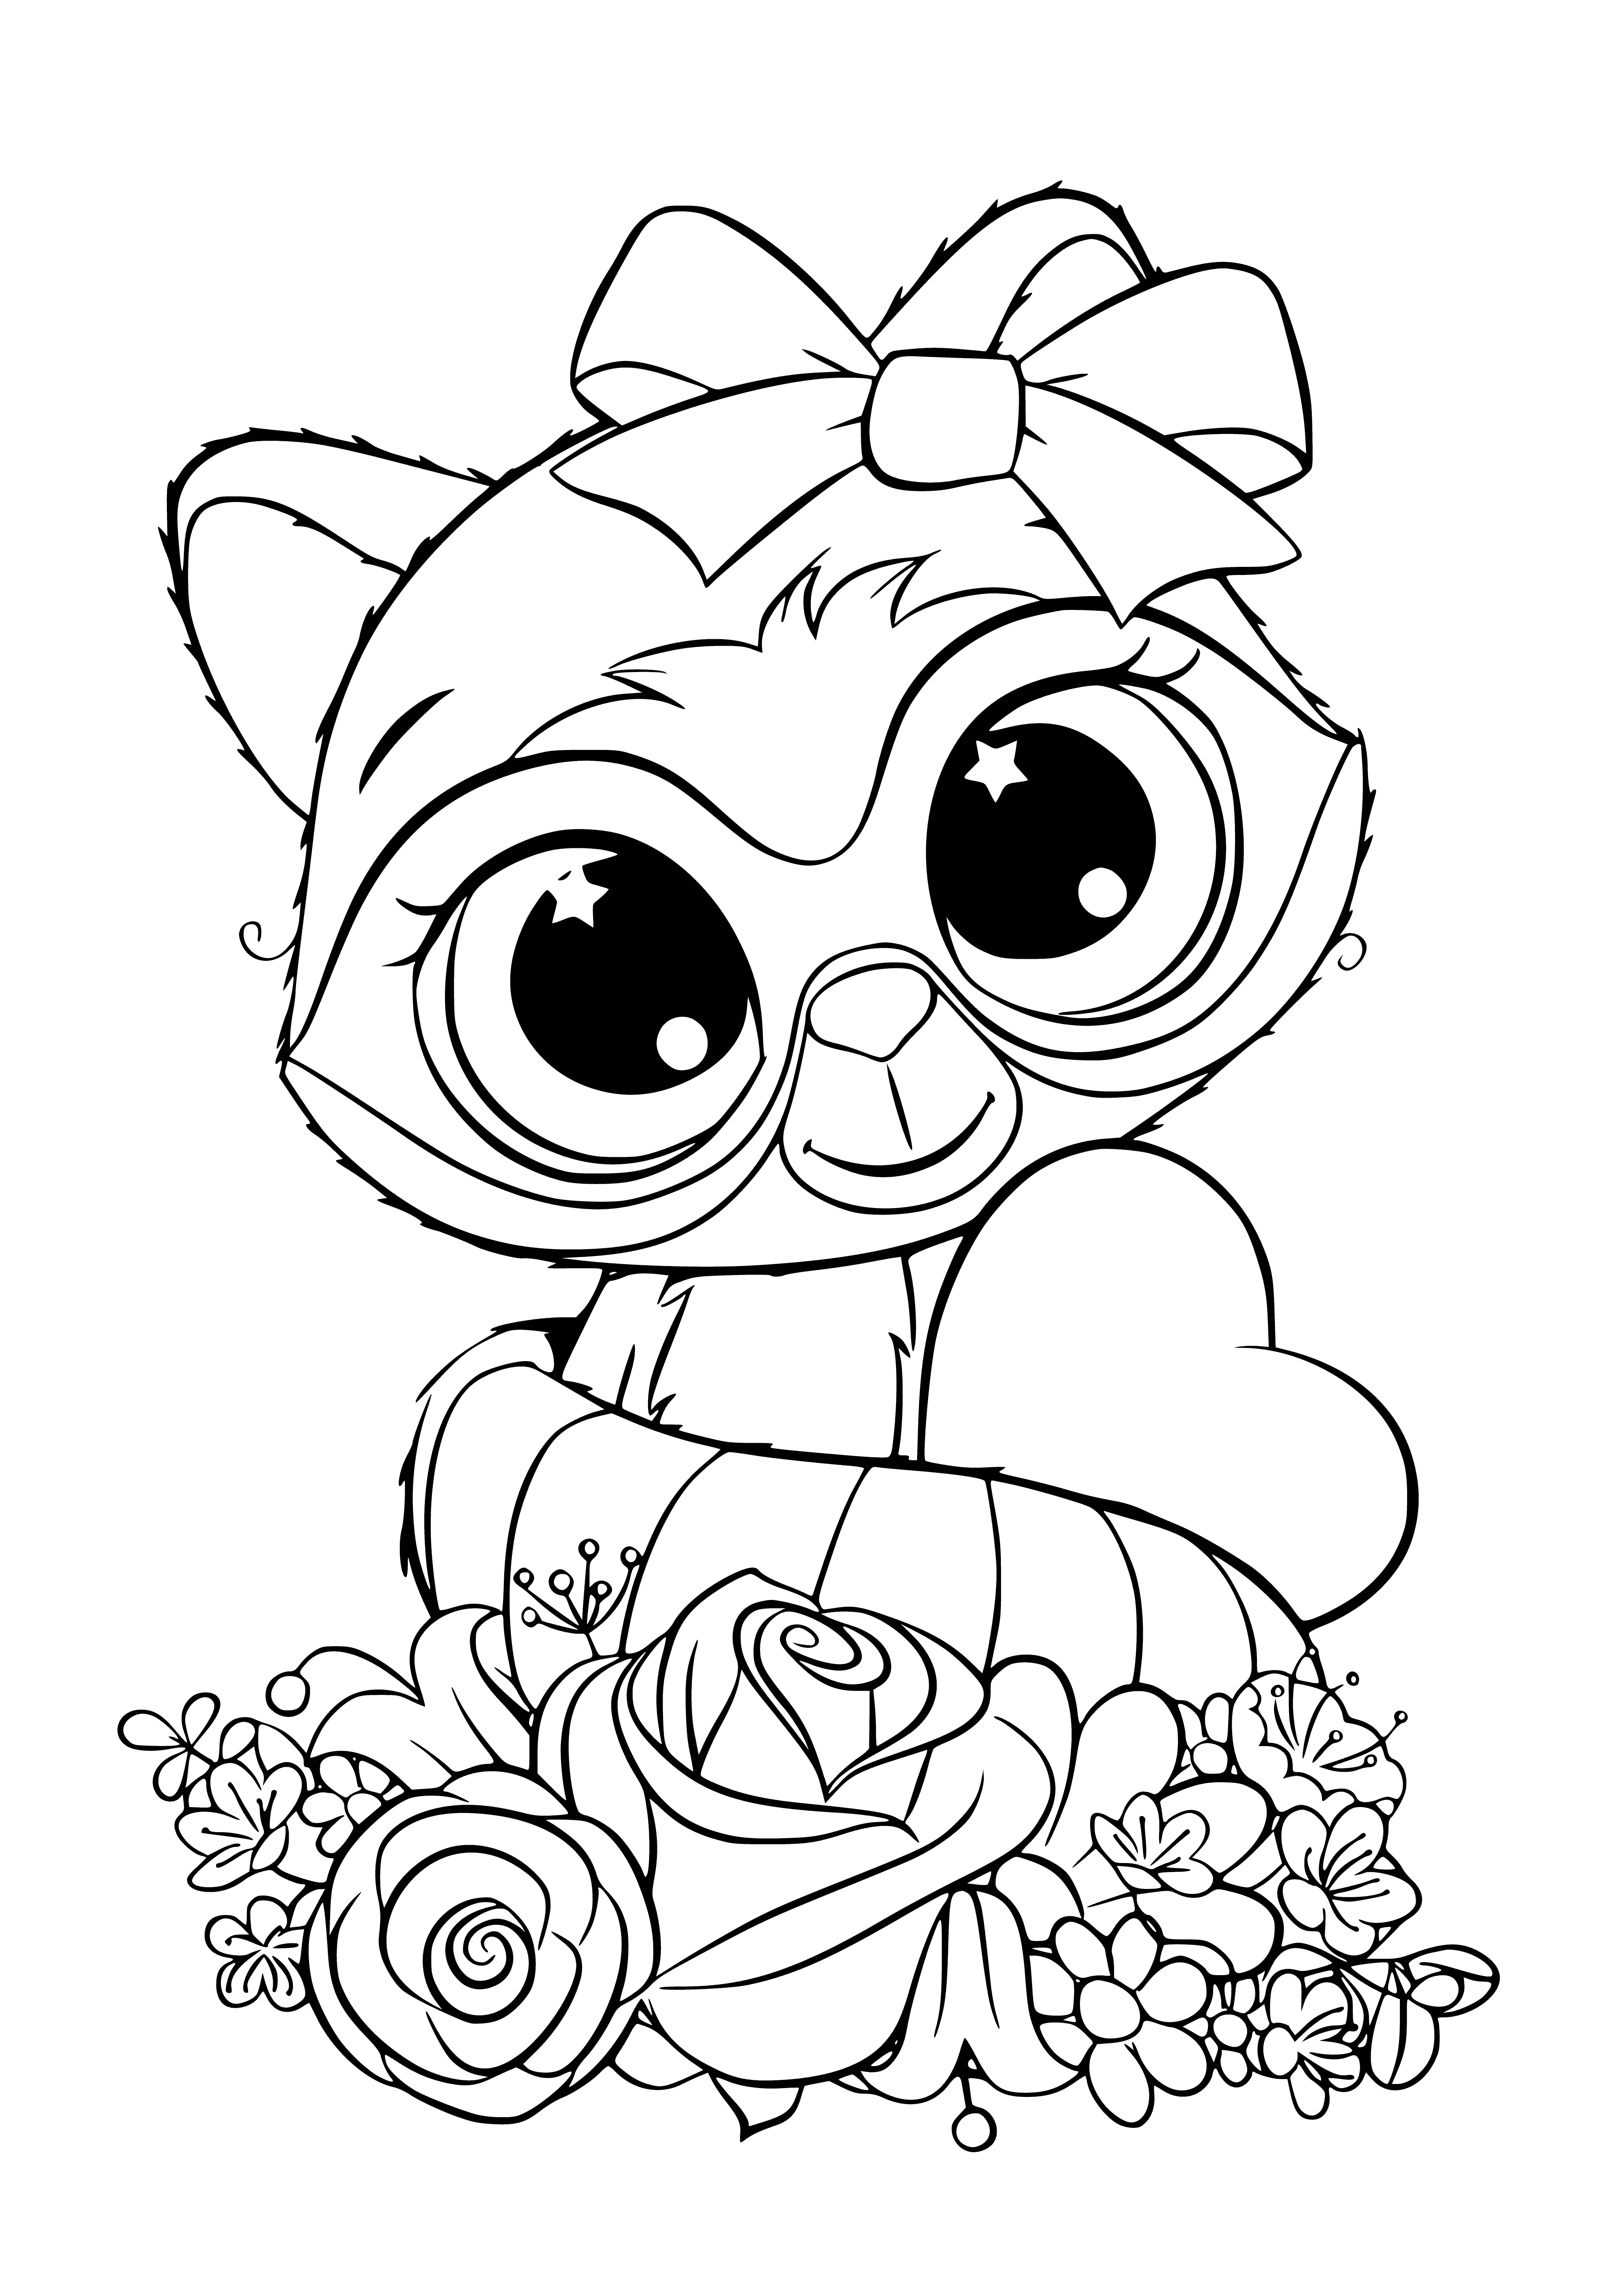 coloring page: Adorable raccoon coloring page featuring fluffy fur, big eyes, friendly wave - perfect for animal lovers looking to relax and color.